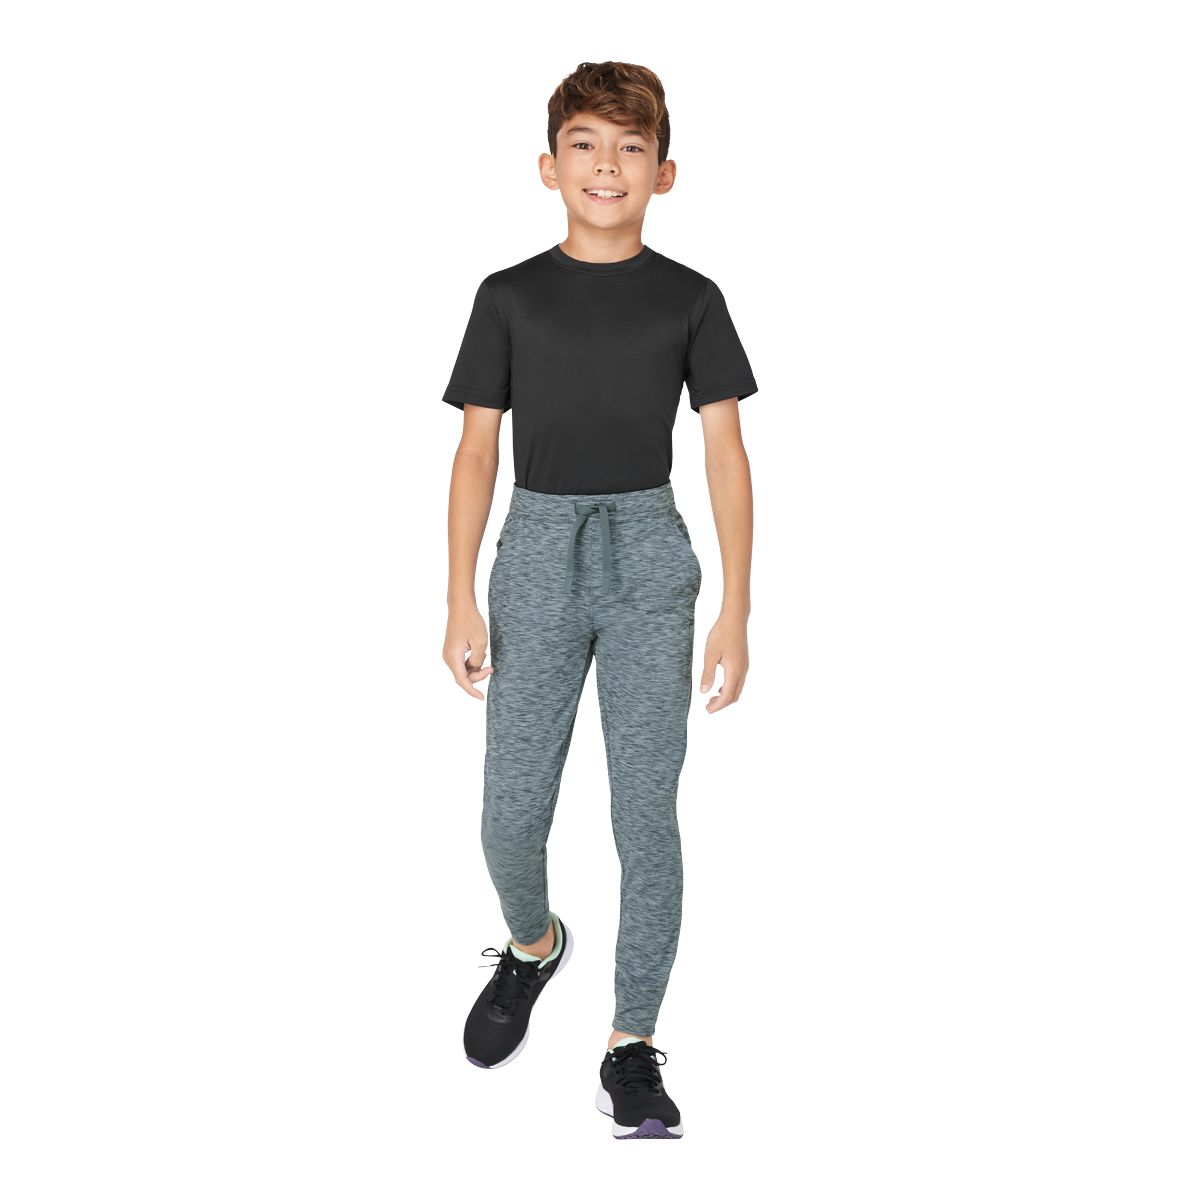 FWD Kids' Boys' OT Sueded Joggers Pants, Casual, Athletic